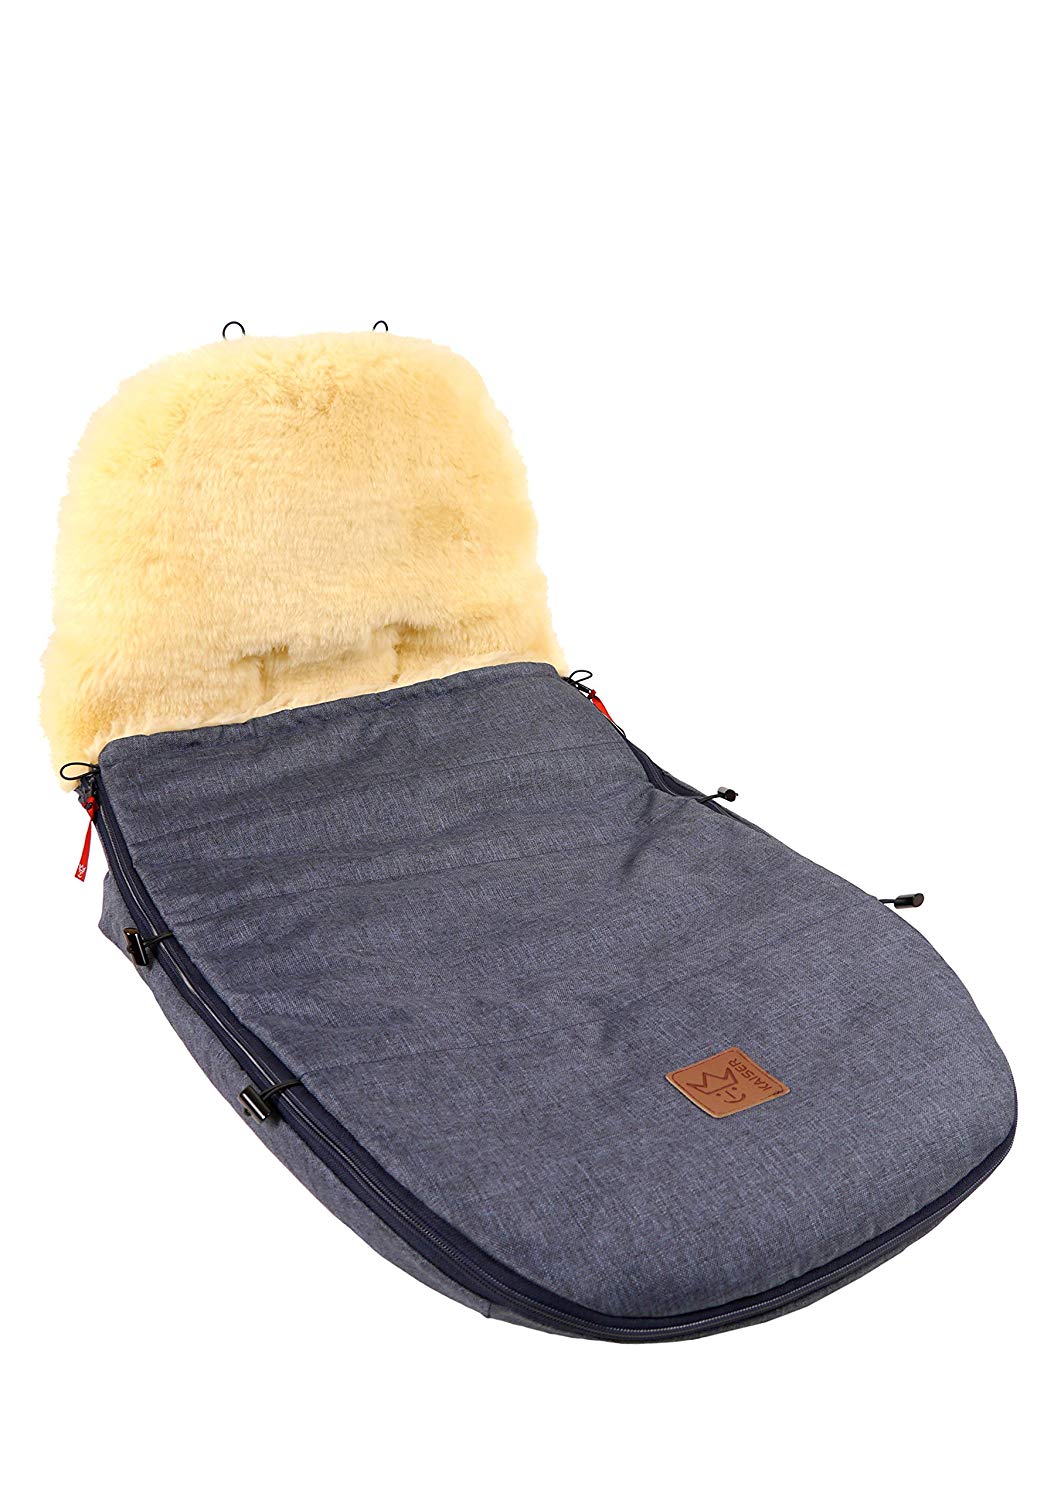 Kaiser 6512072 Pushchair Footmuff Suitable for Bugaboo and Joolz, Navy Melange